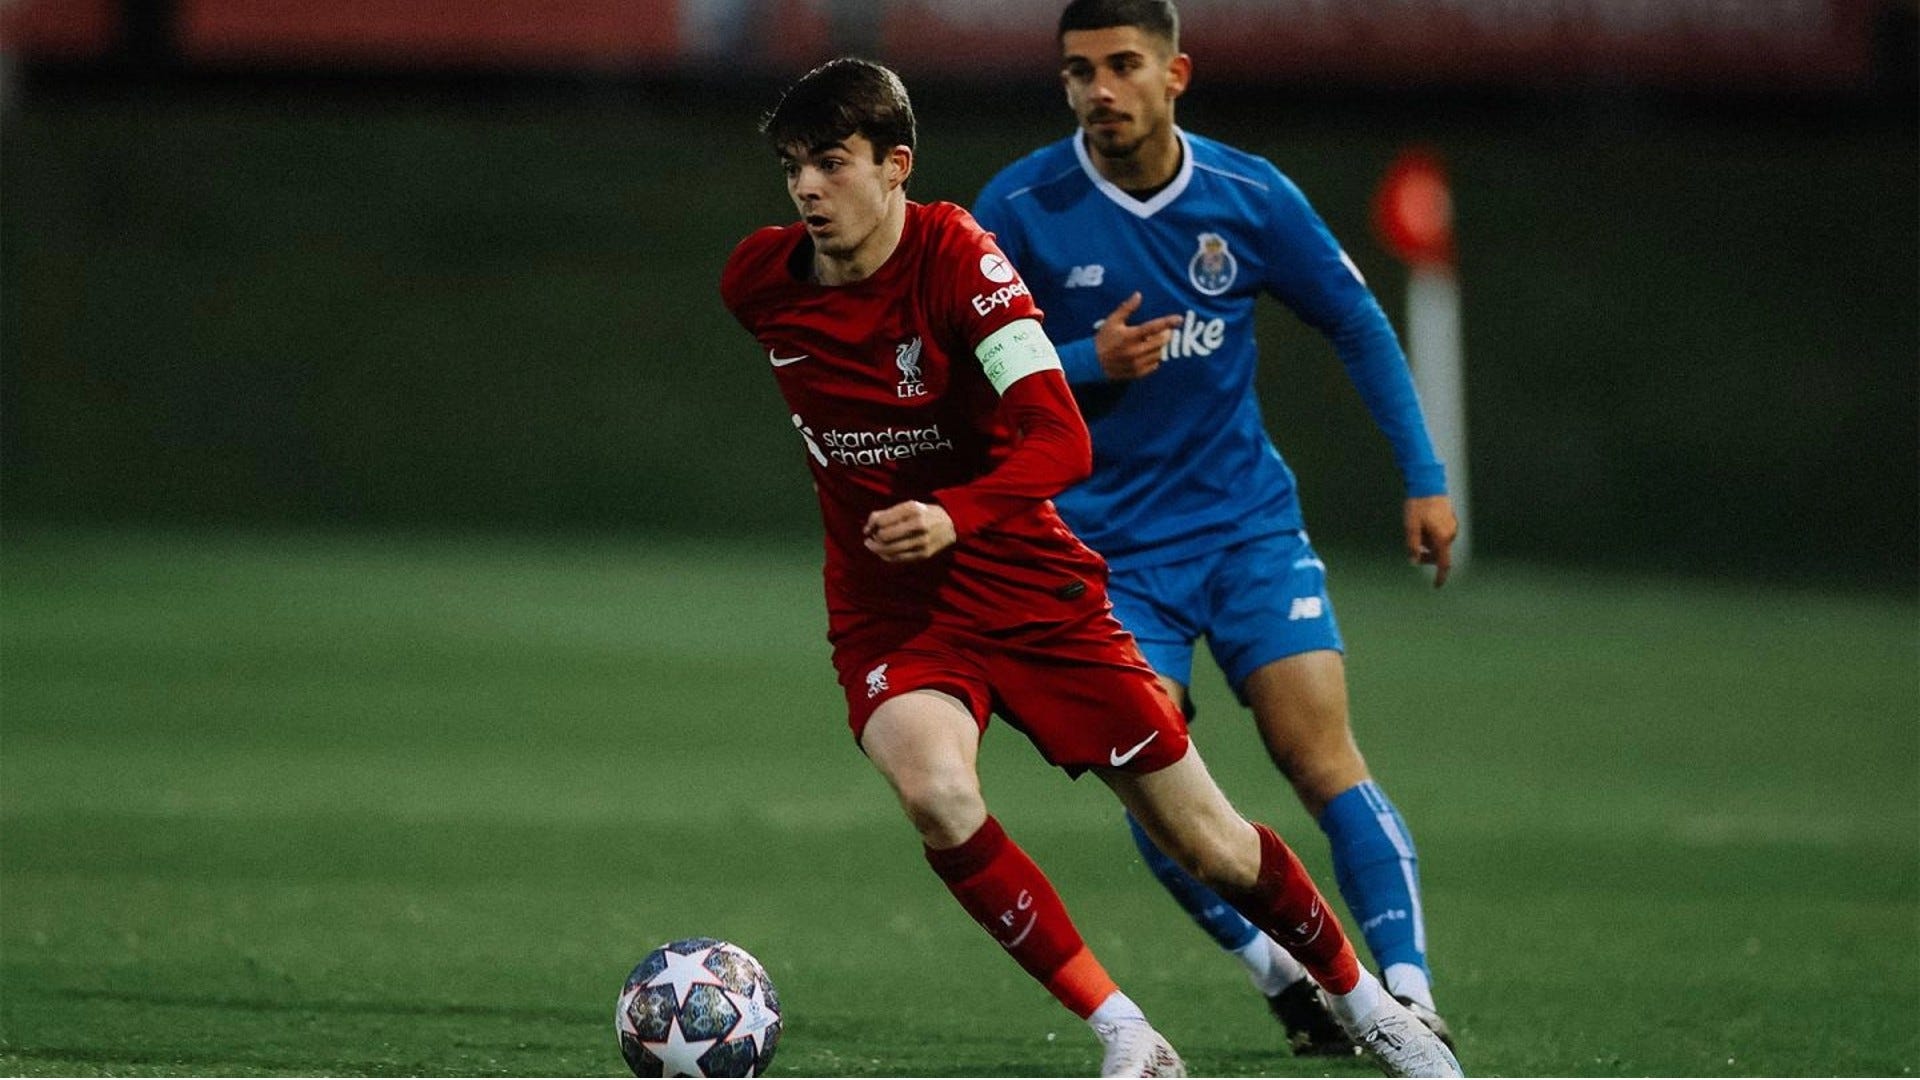 Sporting CP U19 vs Liverpool U19 Live stream, TV channel, kick-off time and where to watch UEFA Youth League quarter-final Goal UK